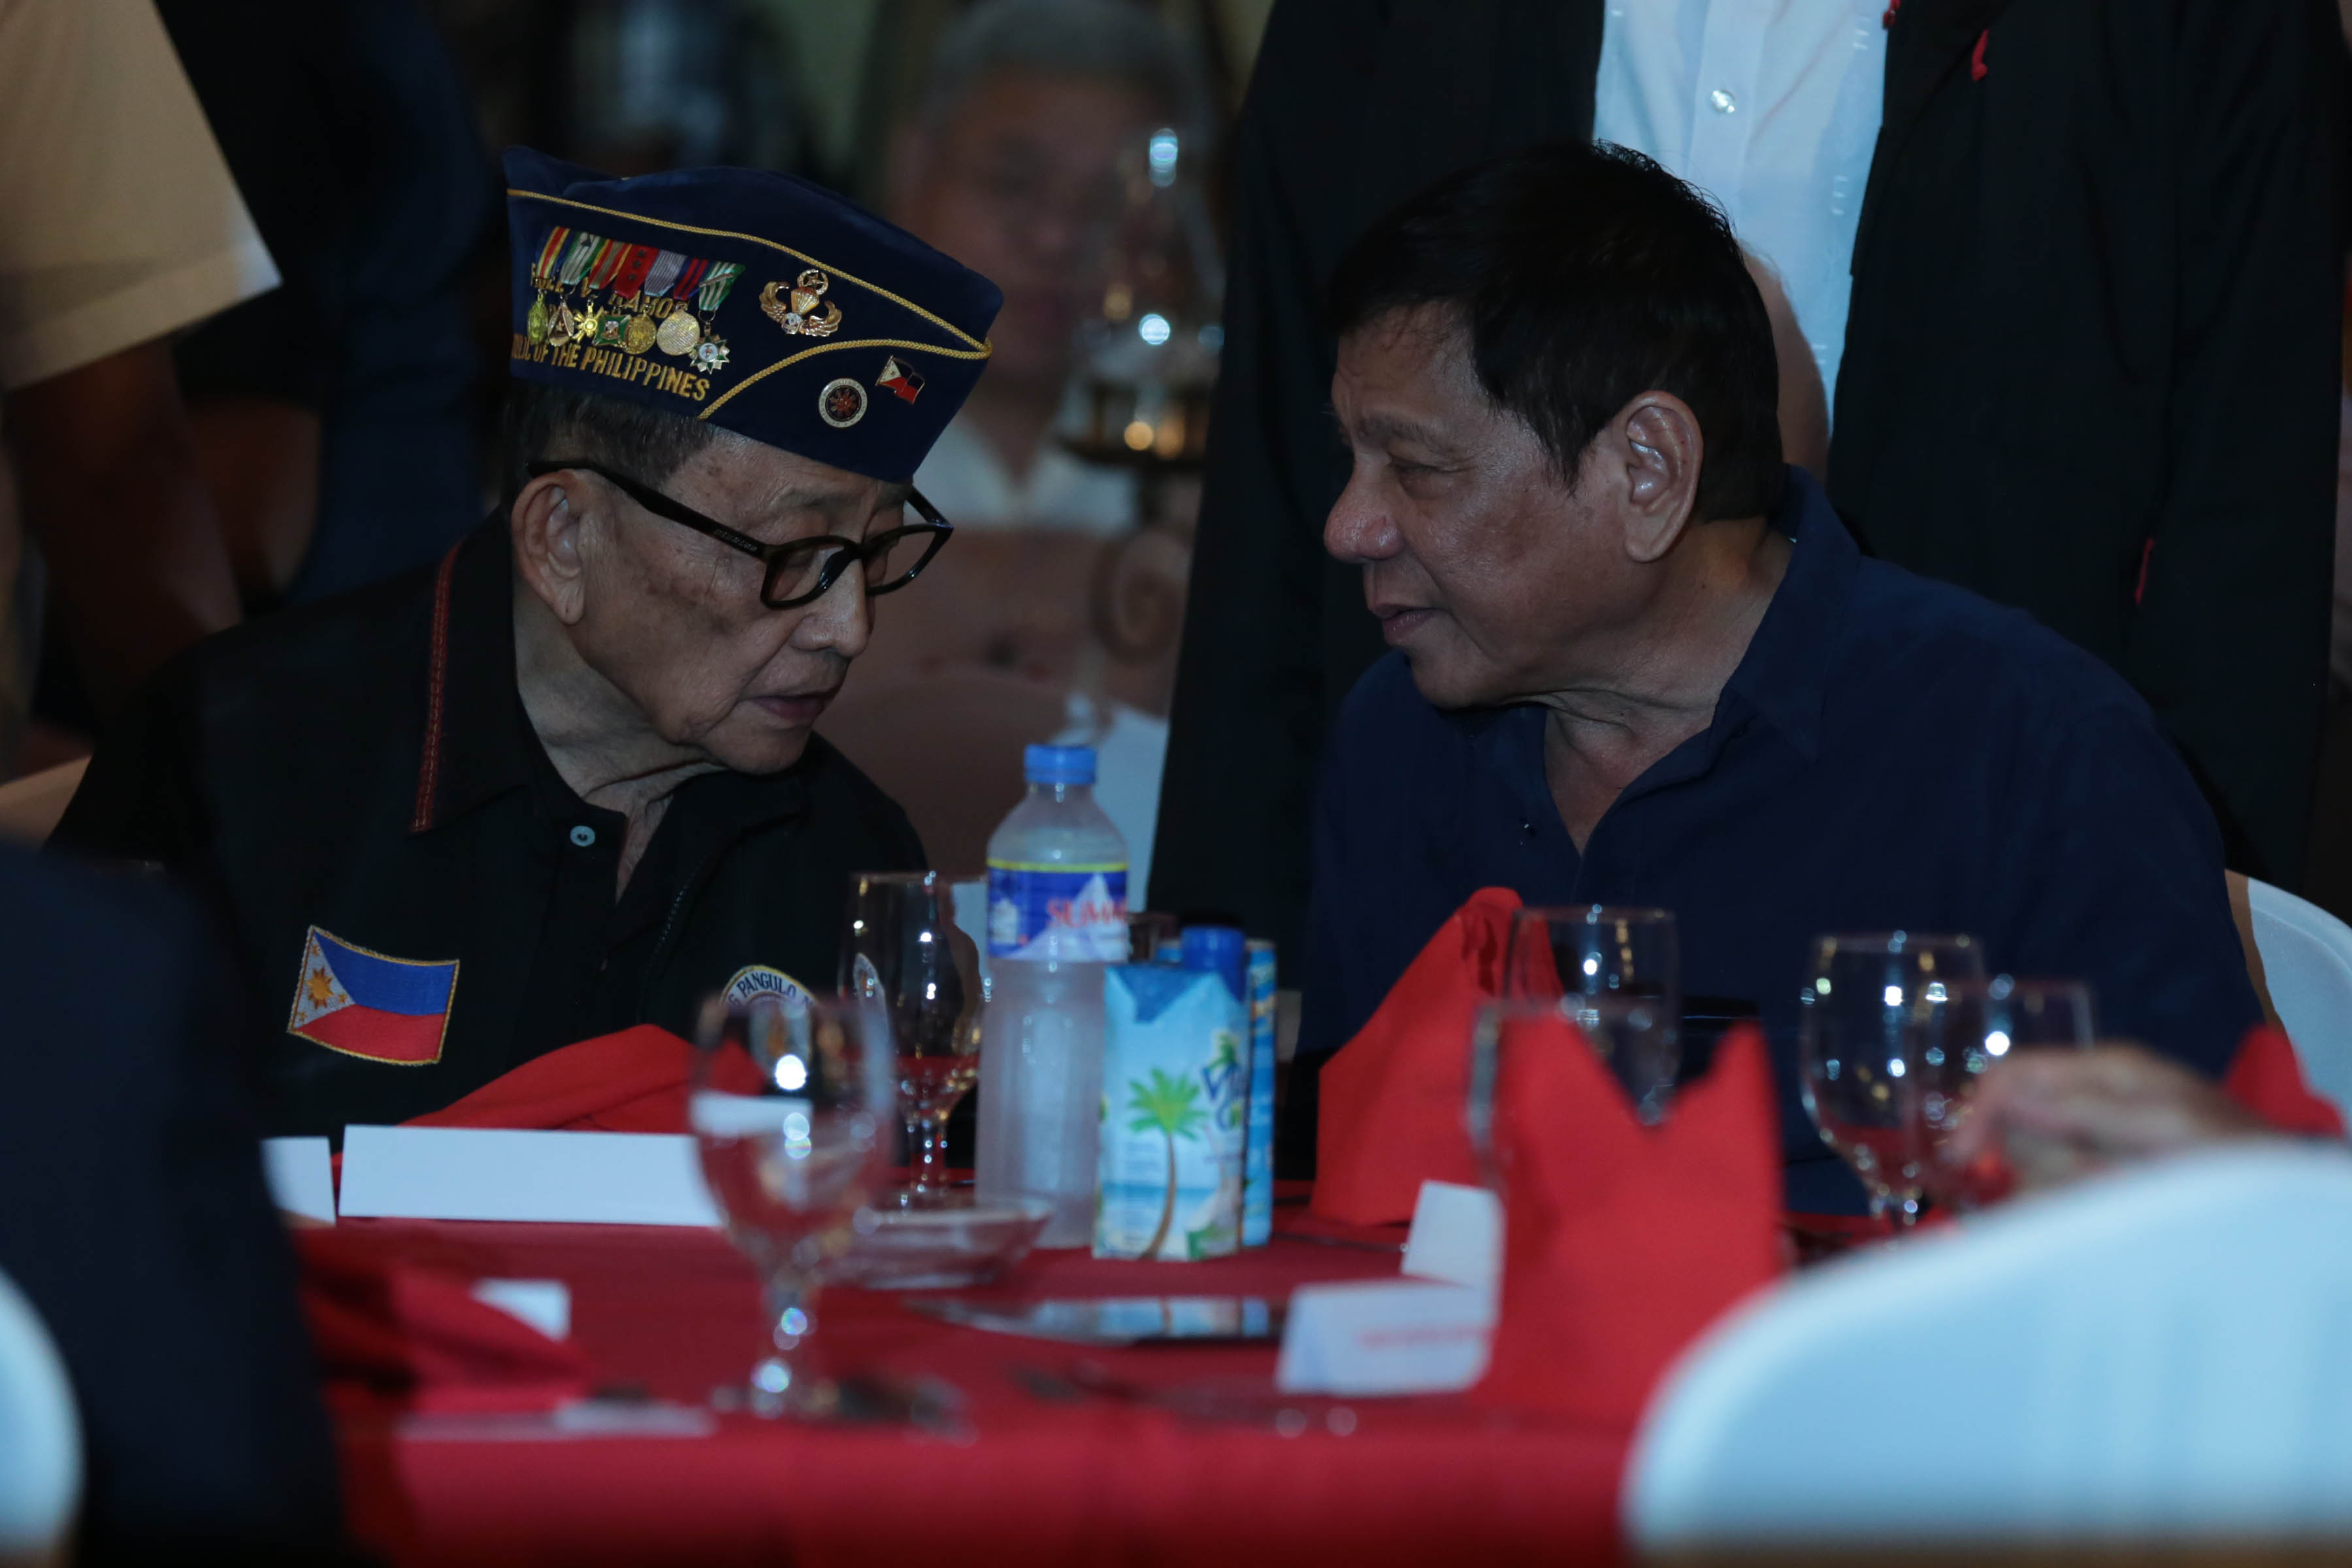 DUTERTE AND FVR. President Rodrigo Duterte chats with Former President Fidel V. Ramos during the Testimonial Dinner Reception organized by the San Beda Law Alumni Association on July 14, 2016. Photo by TOTO LOZANO/PPD 